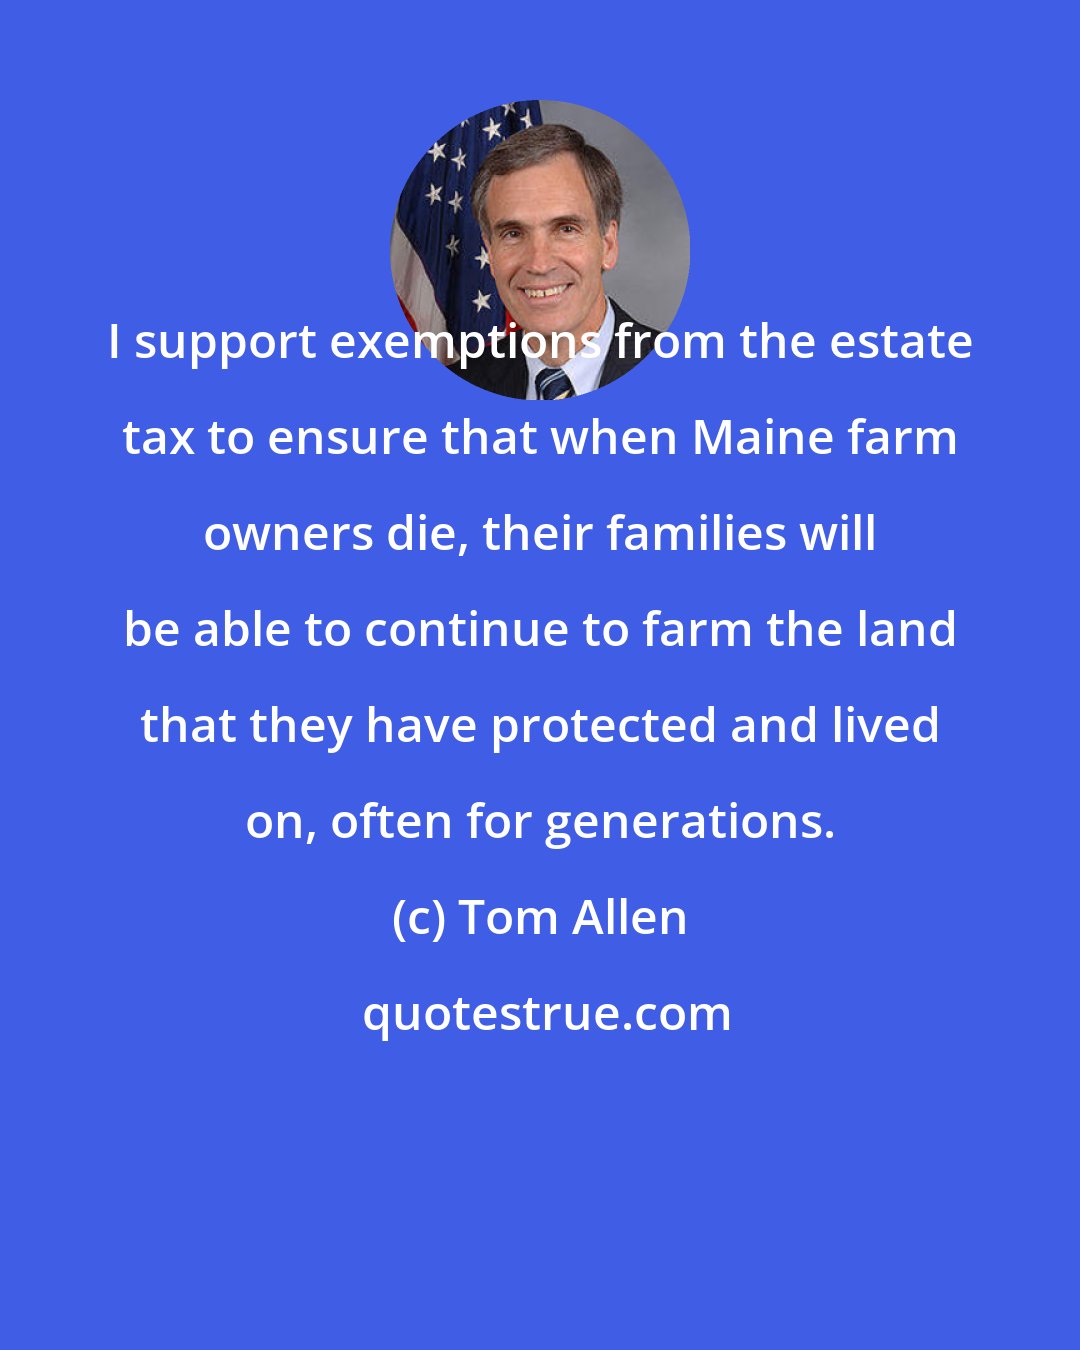 Tom Allen: I support exemptions from the estate tax to ensure that when Maine farm owners die, their families will be able to continue to farm the land that they have protected and lived on, often for generations.